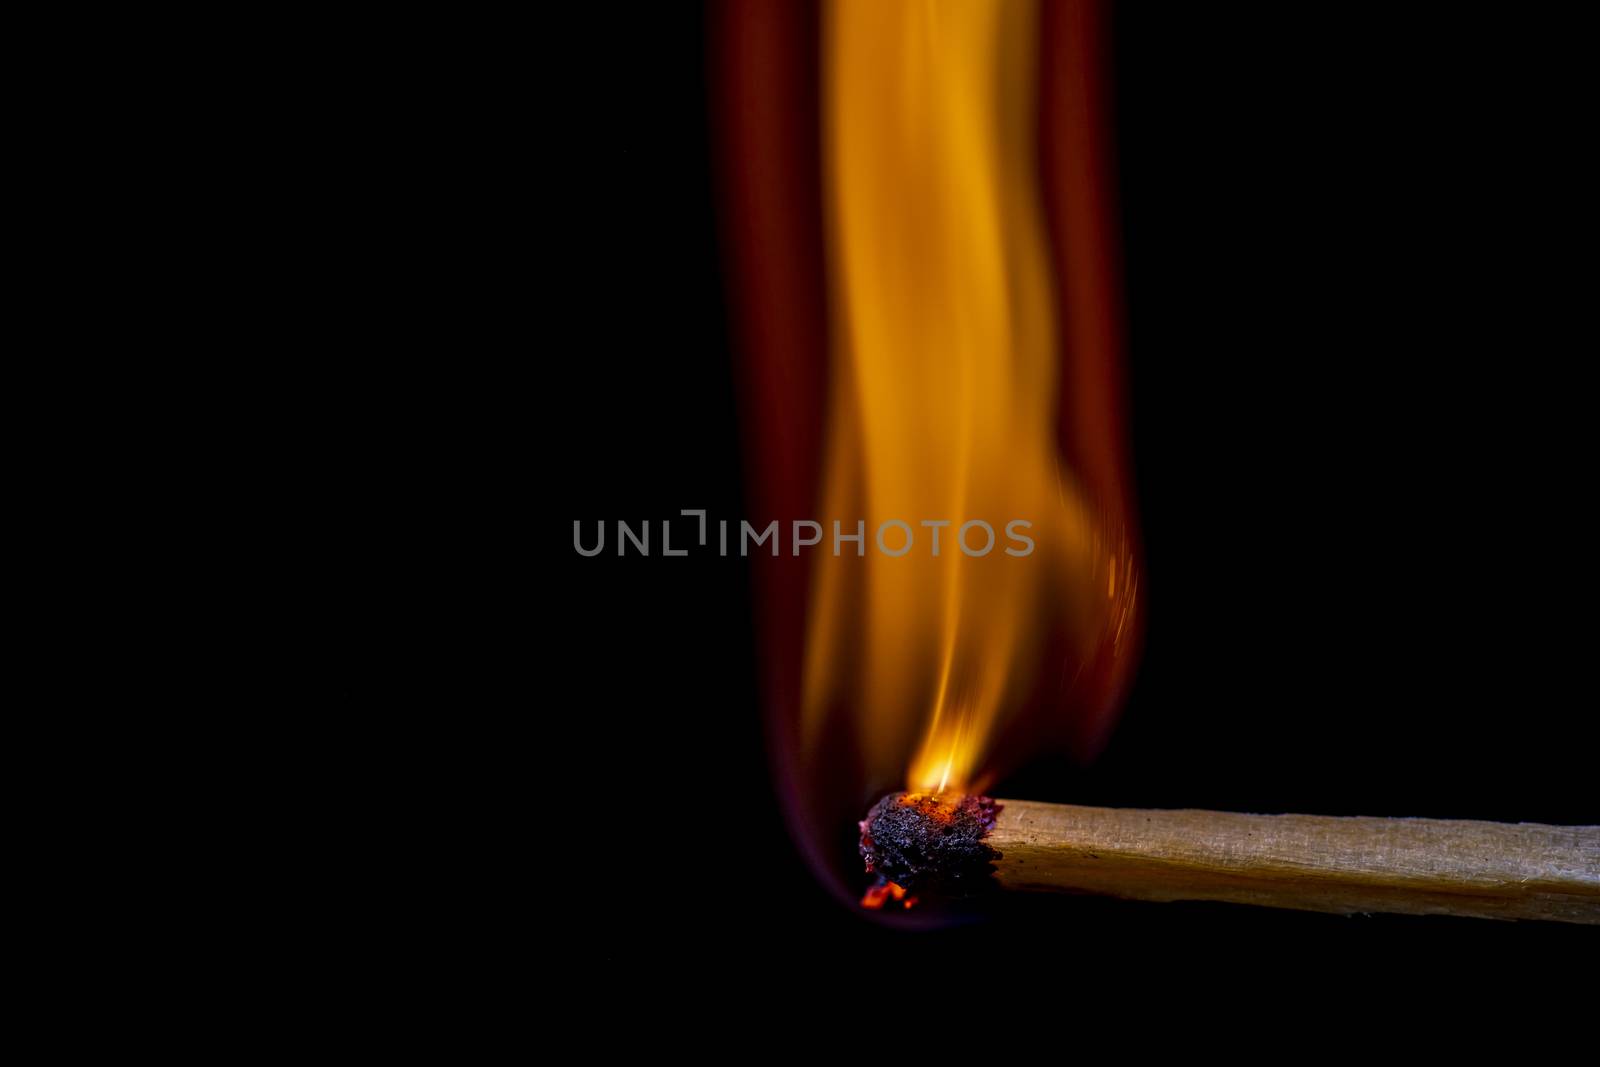 Match burning after being lit showing flame against black background.